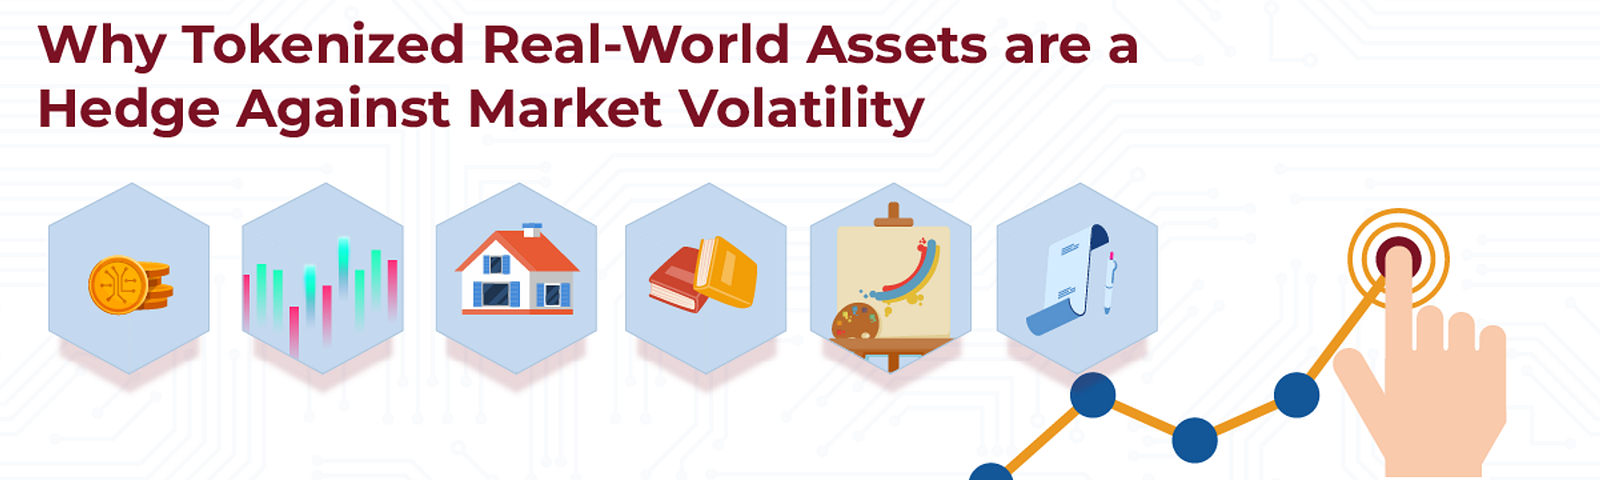 Why Tokenized Real-World Assets are a Hedge Against Market Volatility